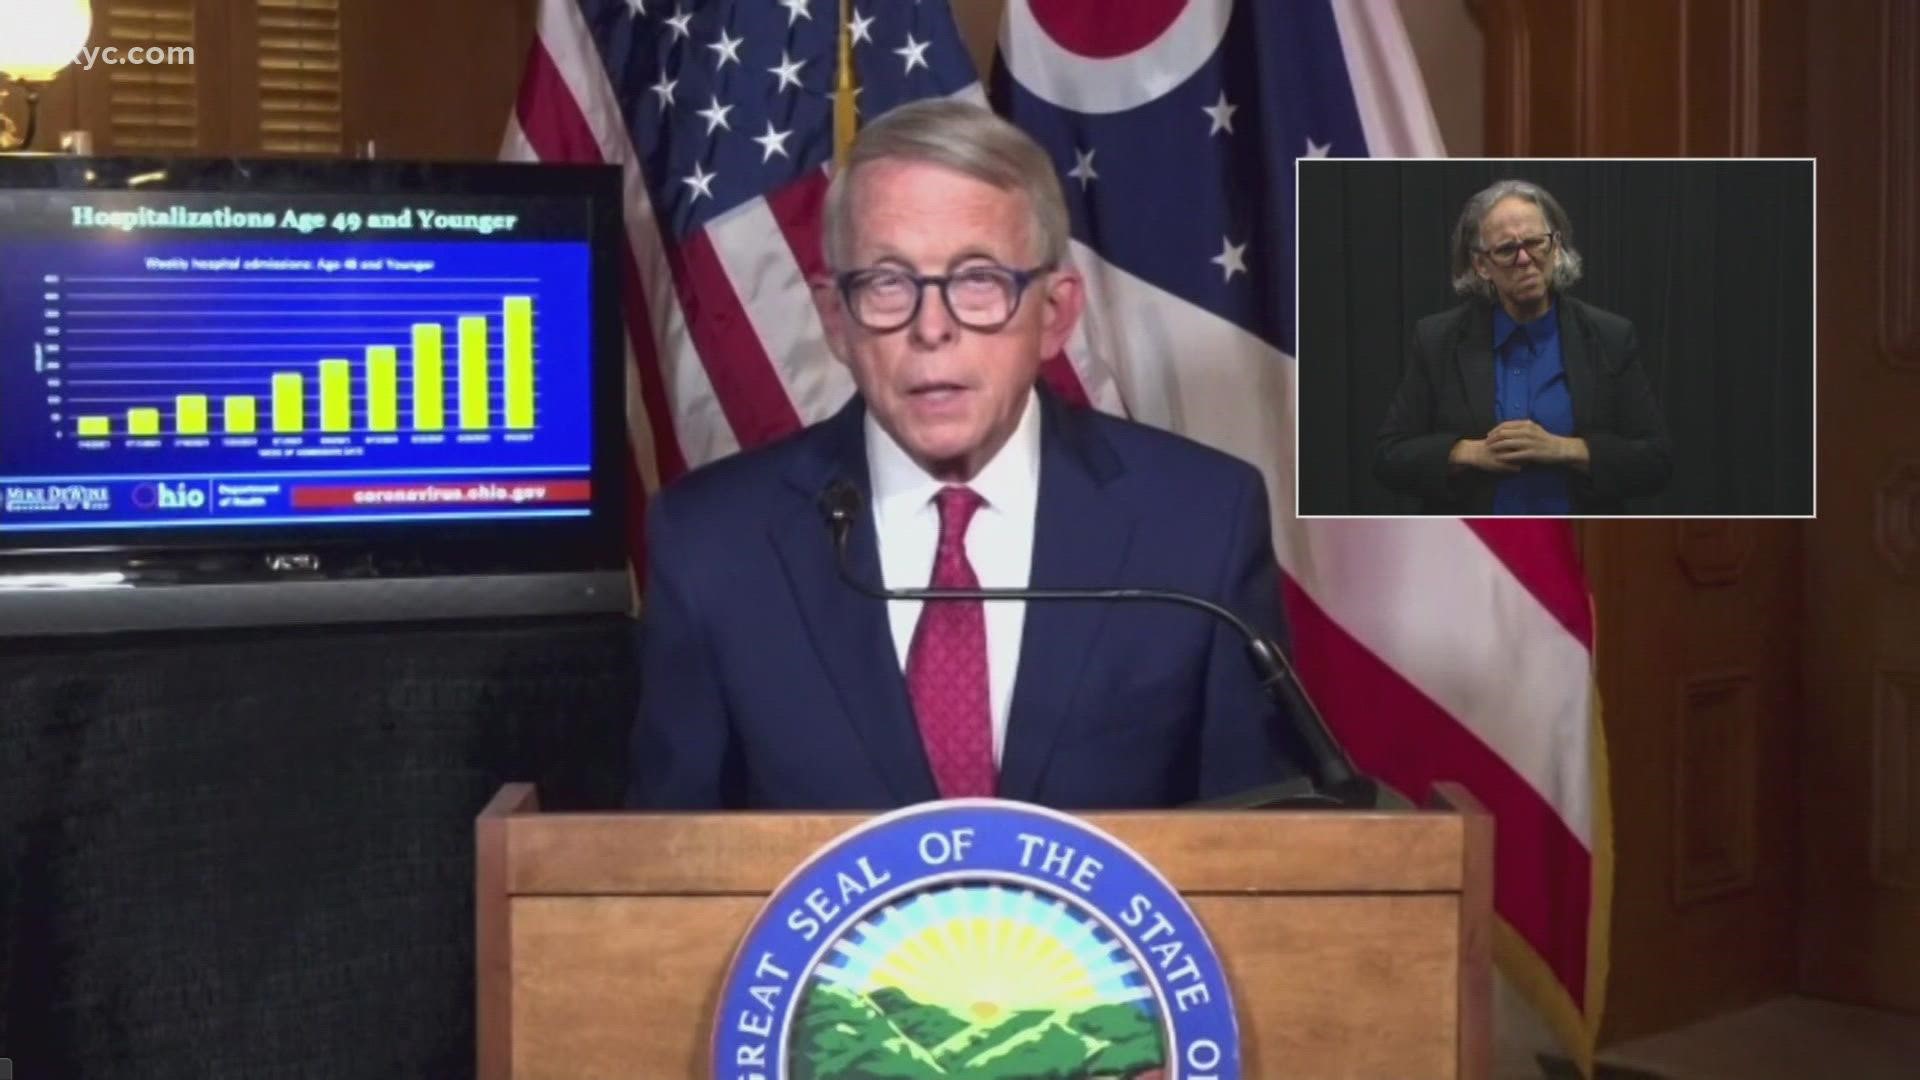 Ohio Governor Mike DeWine revealed on Tuesday that people age 39 and younger have hit a pandemic-high for COVID-19 hospitalizations.